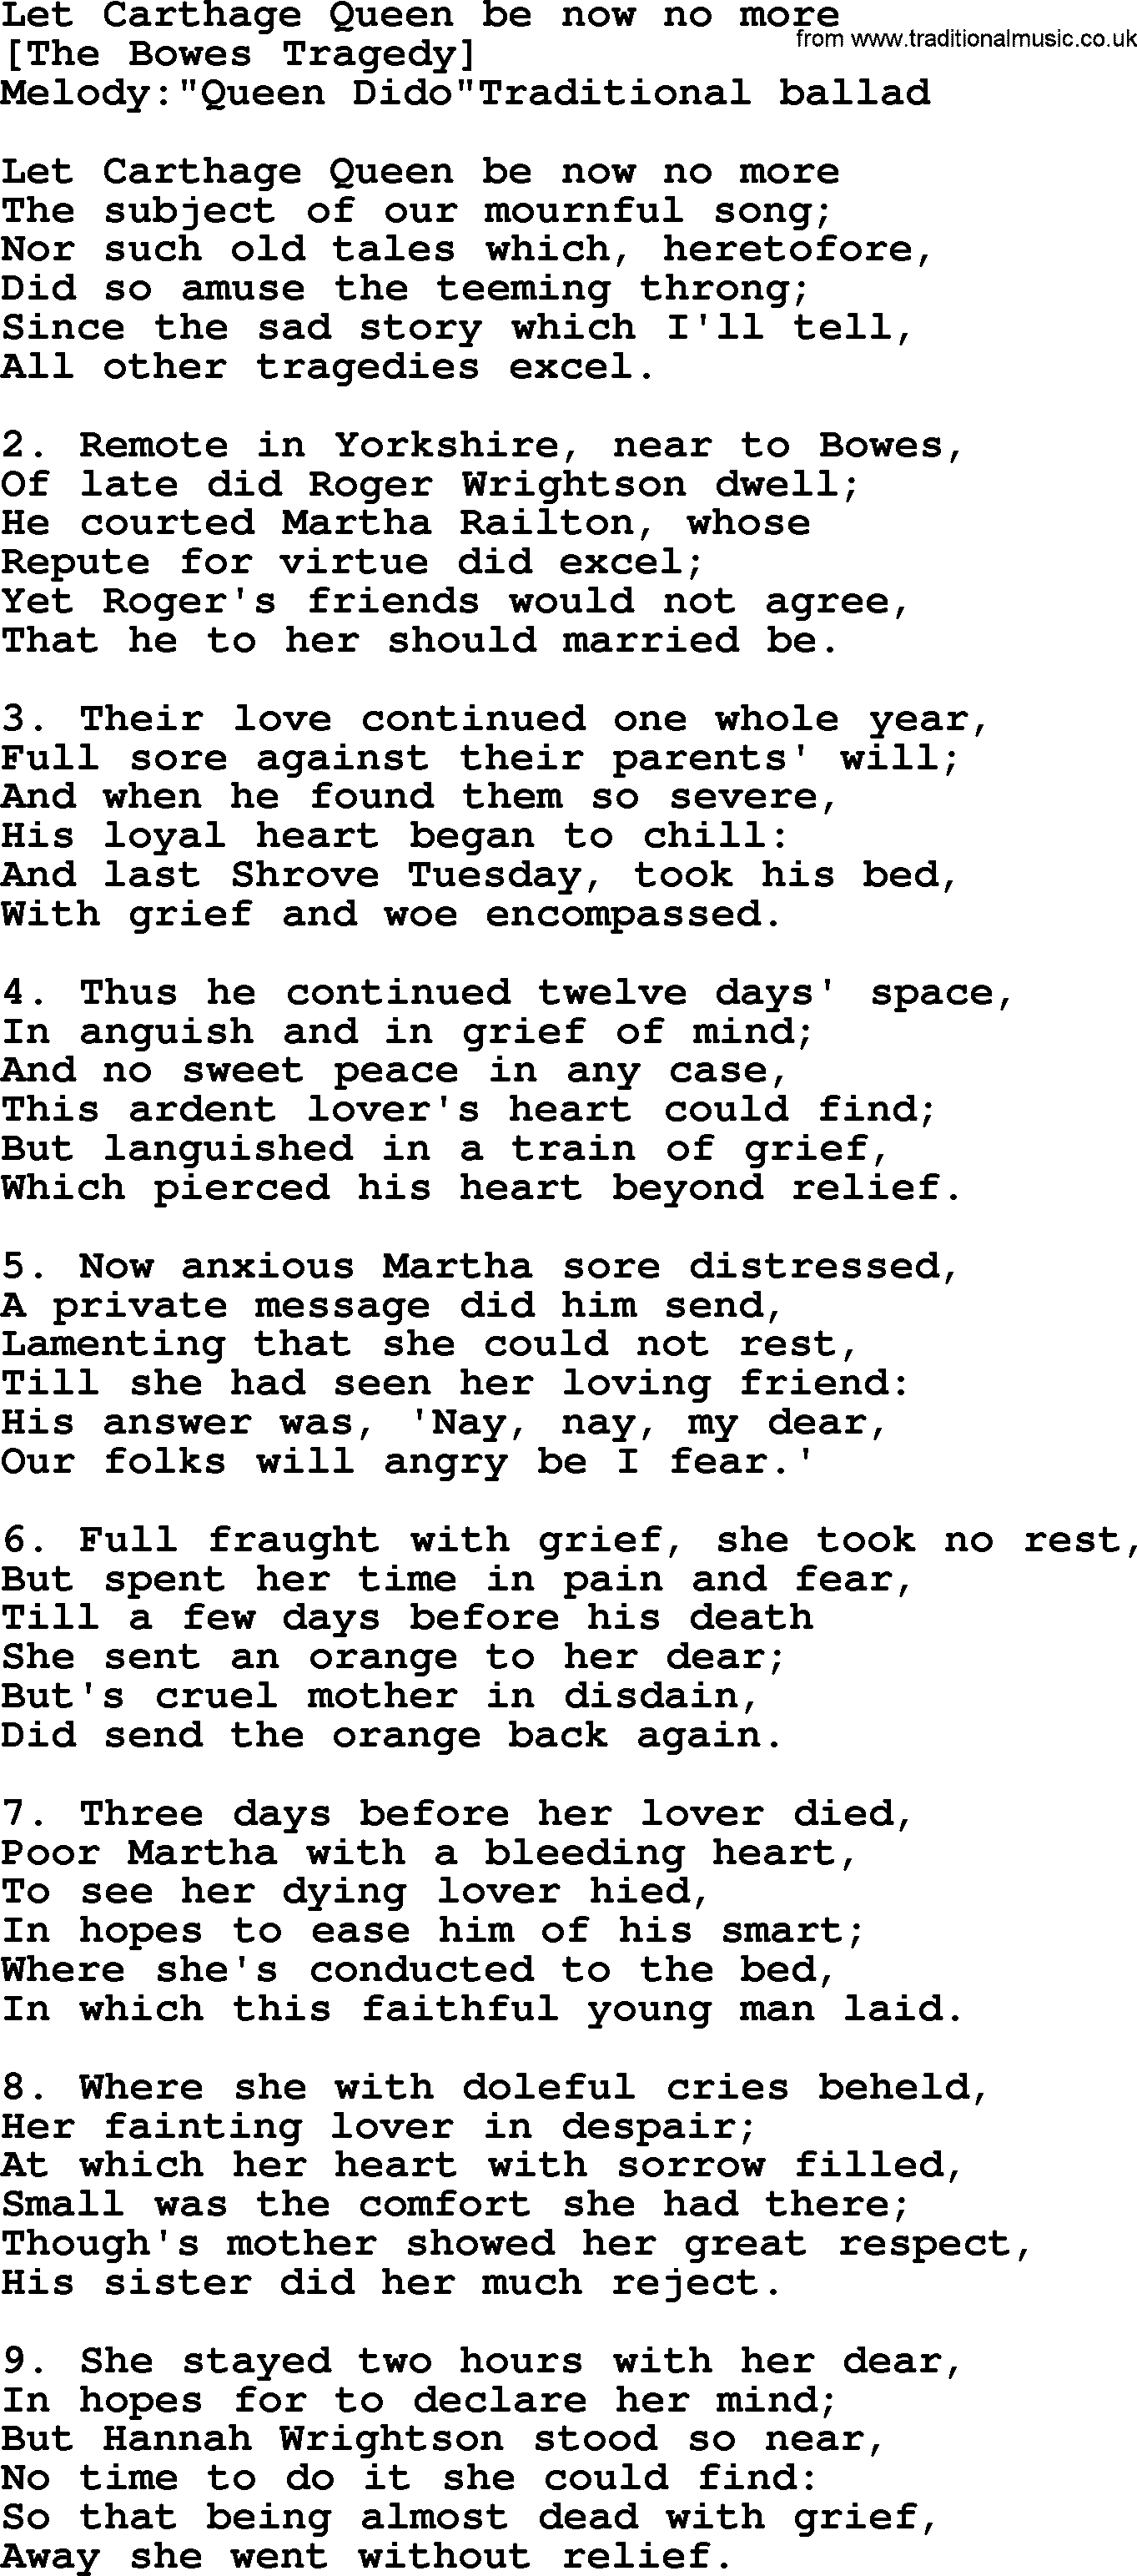 Old English Song: Let Carthage Queen Be Now No More lyrics